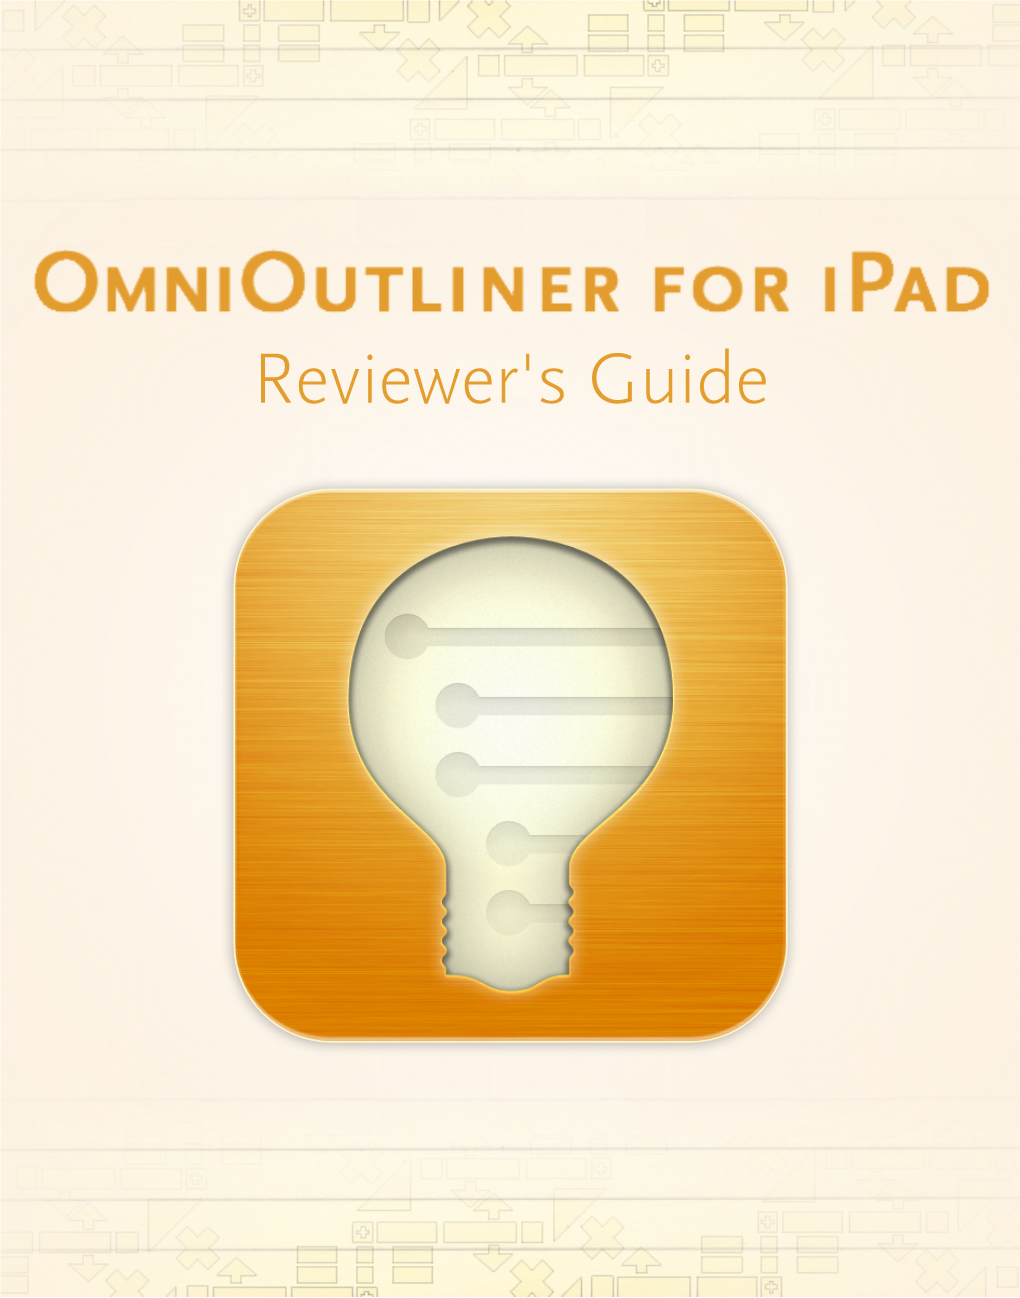 Reviewer's Guide 2 Overview